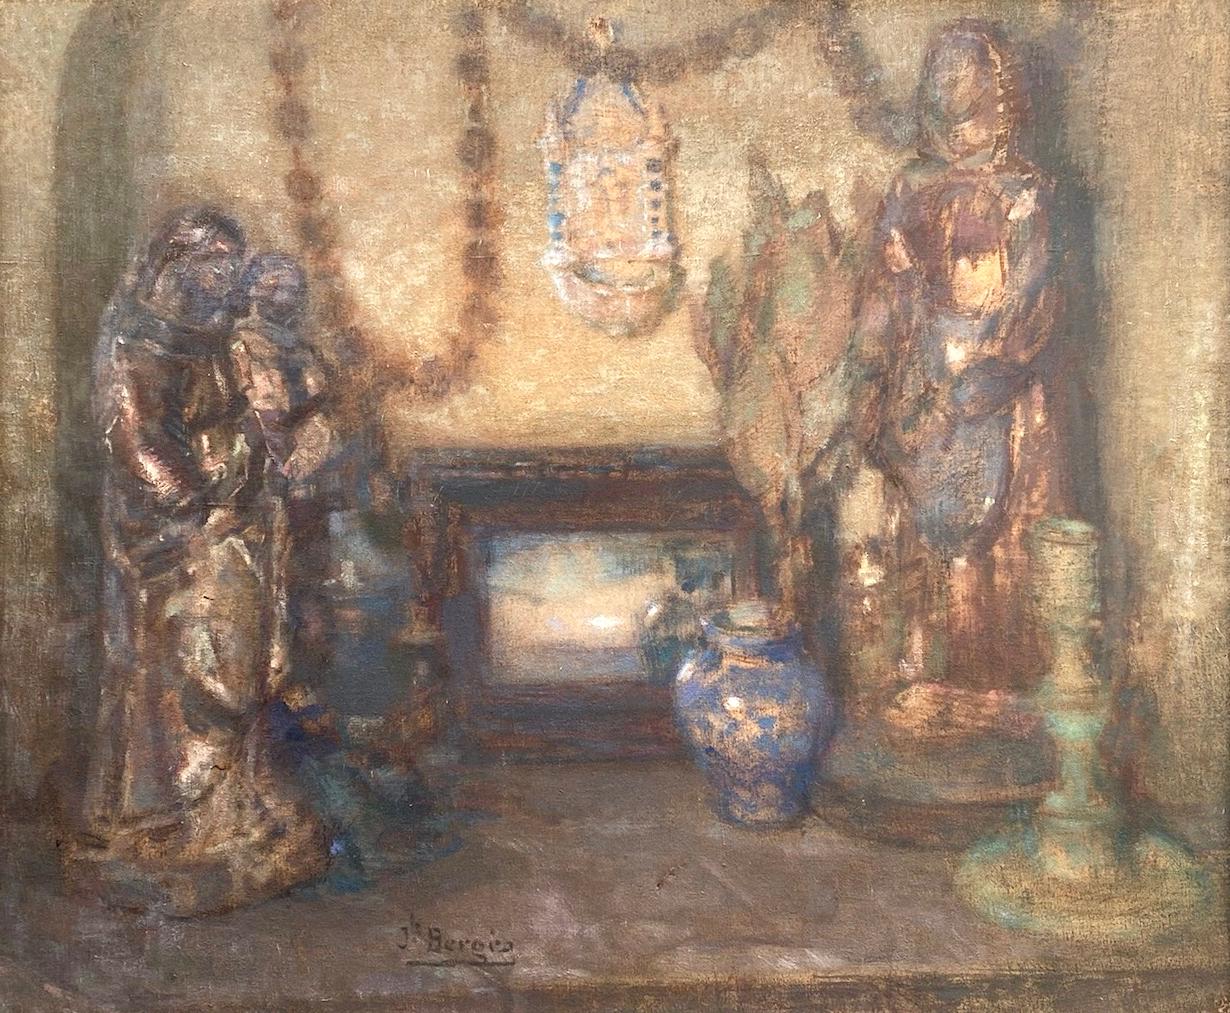 A rustic chapel, natural earth tones, devotional objects and saint figures  - Painting by Josef Berges